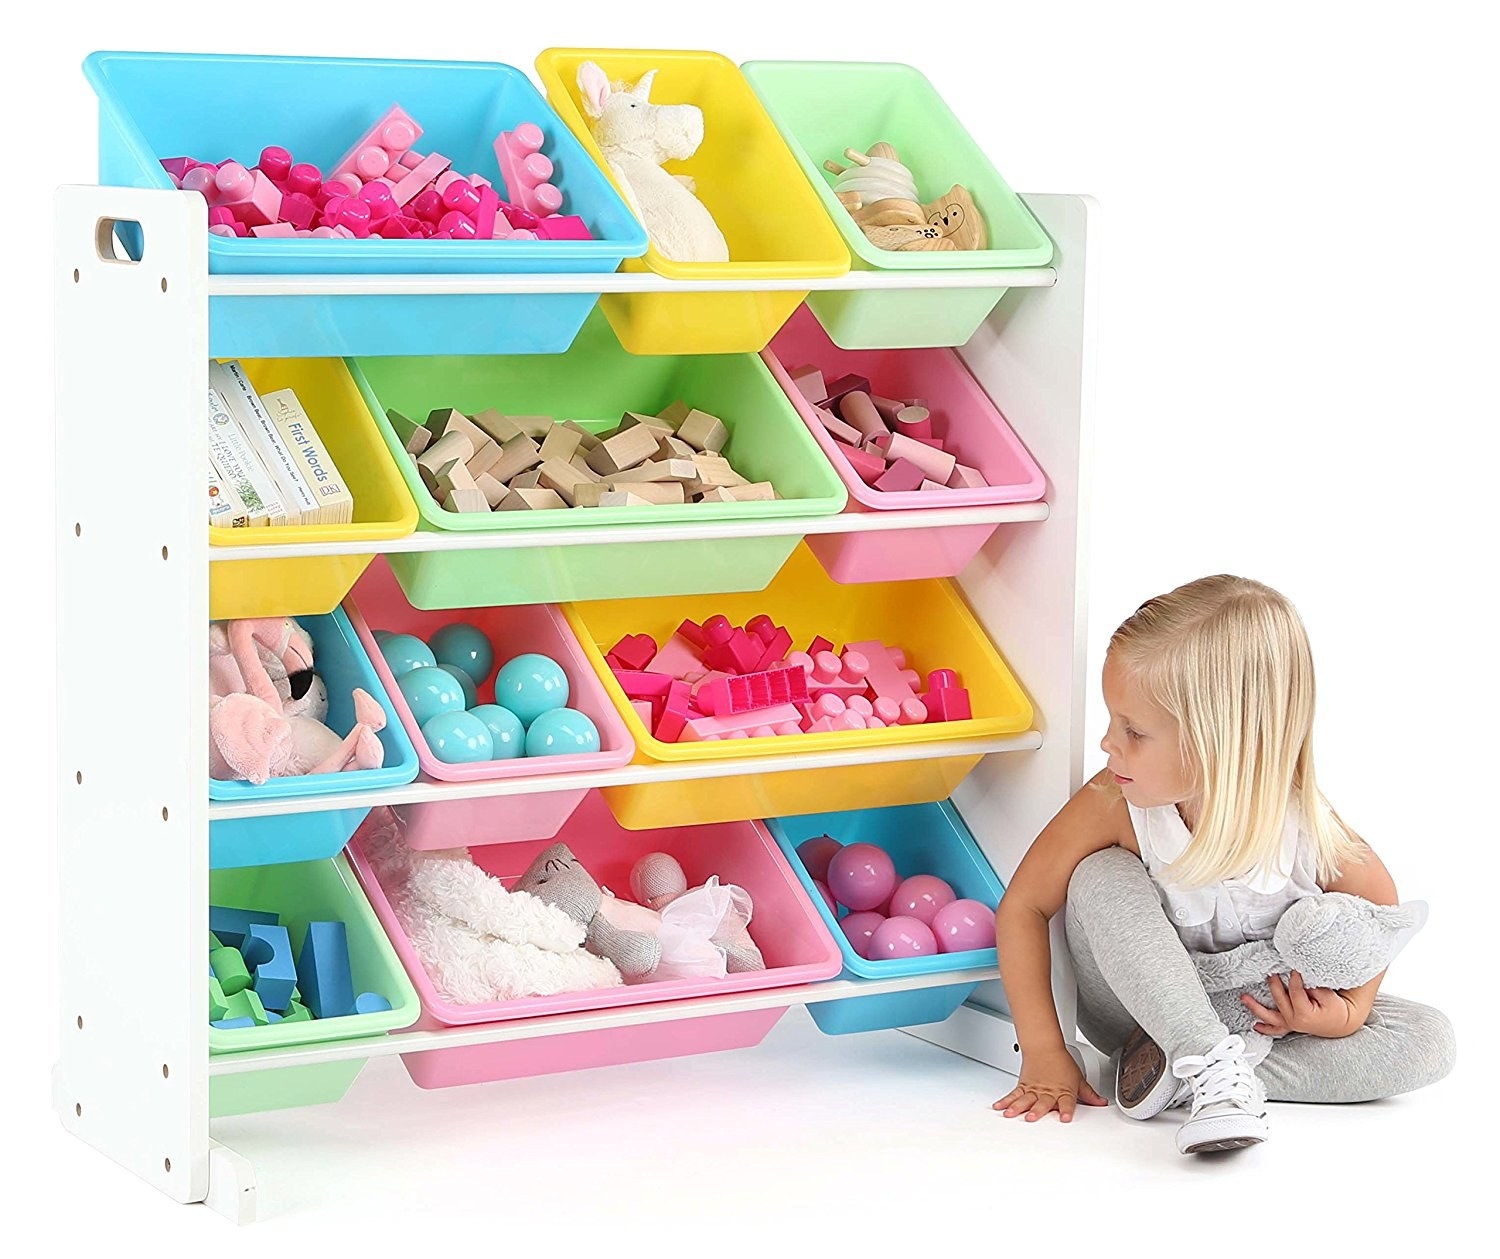 The Best Products to Help You Organize Your Kids' Stuff